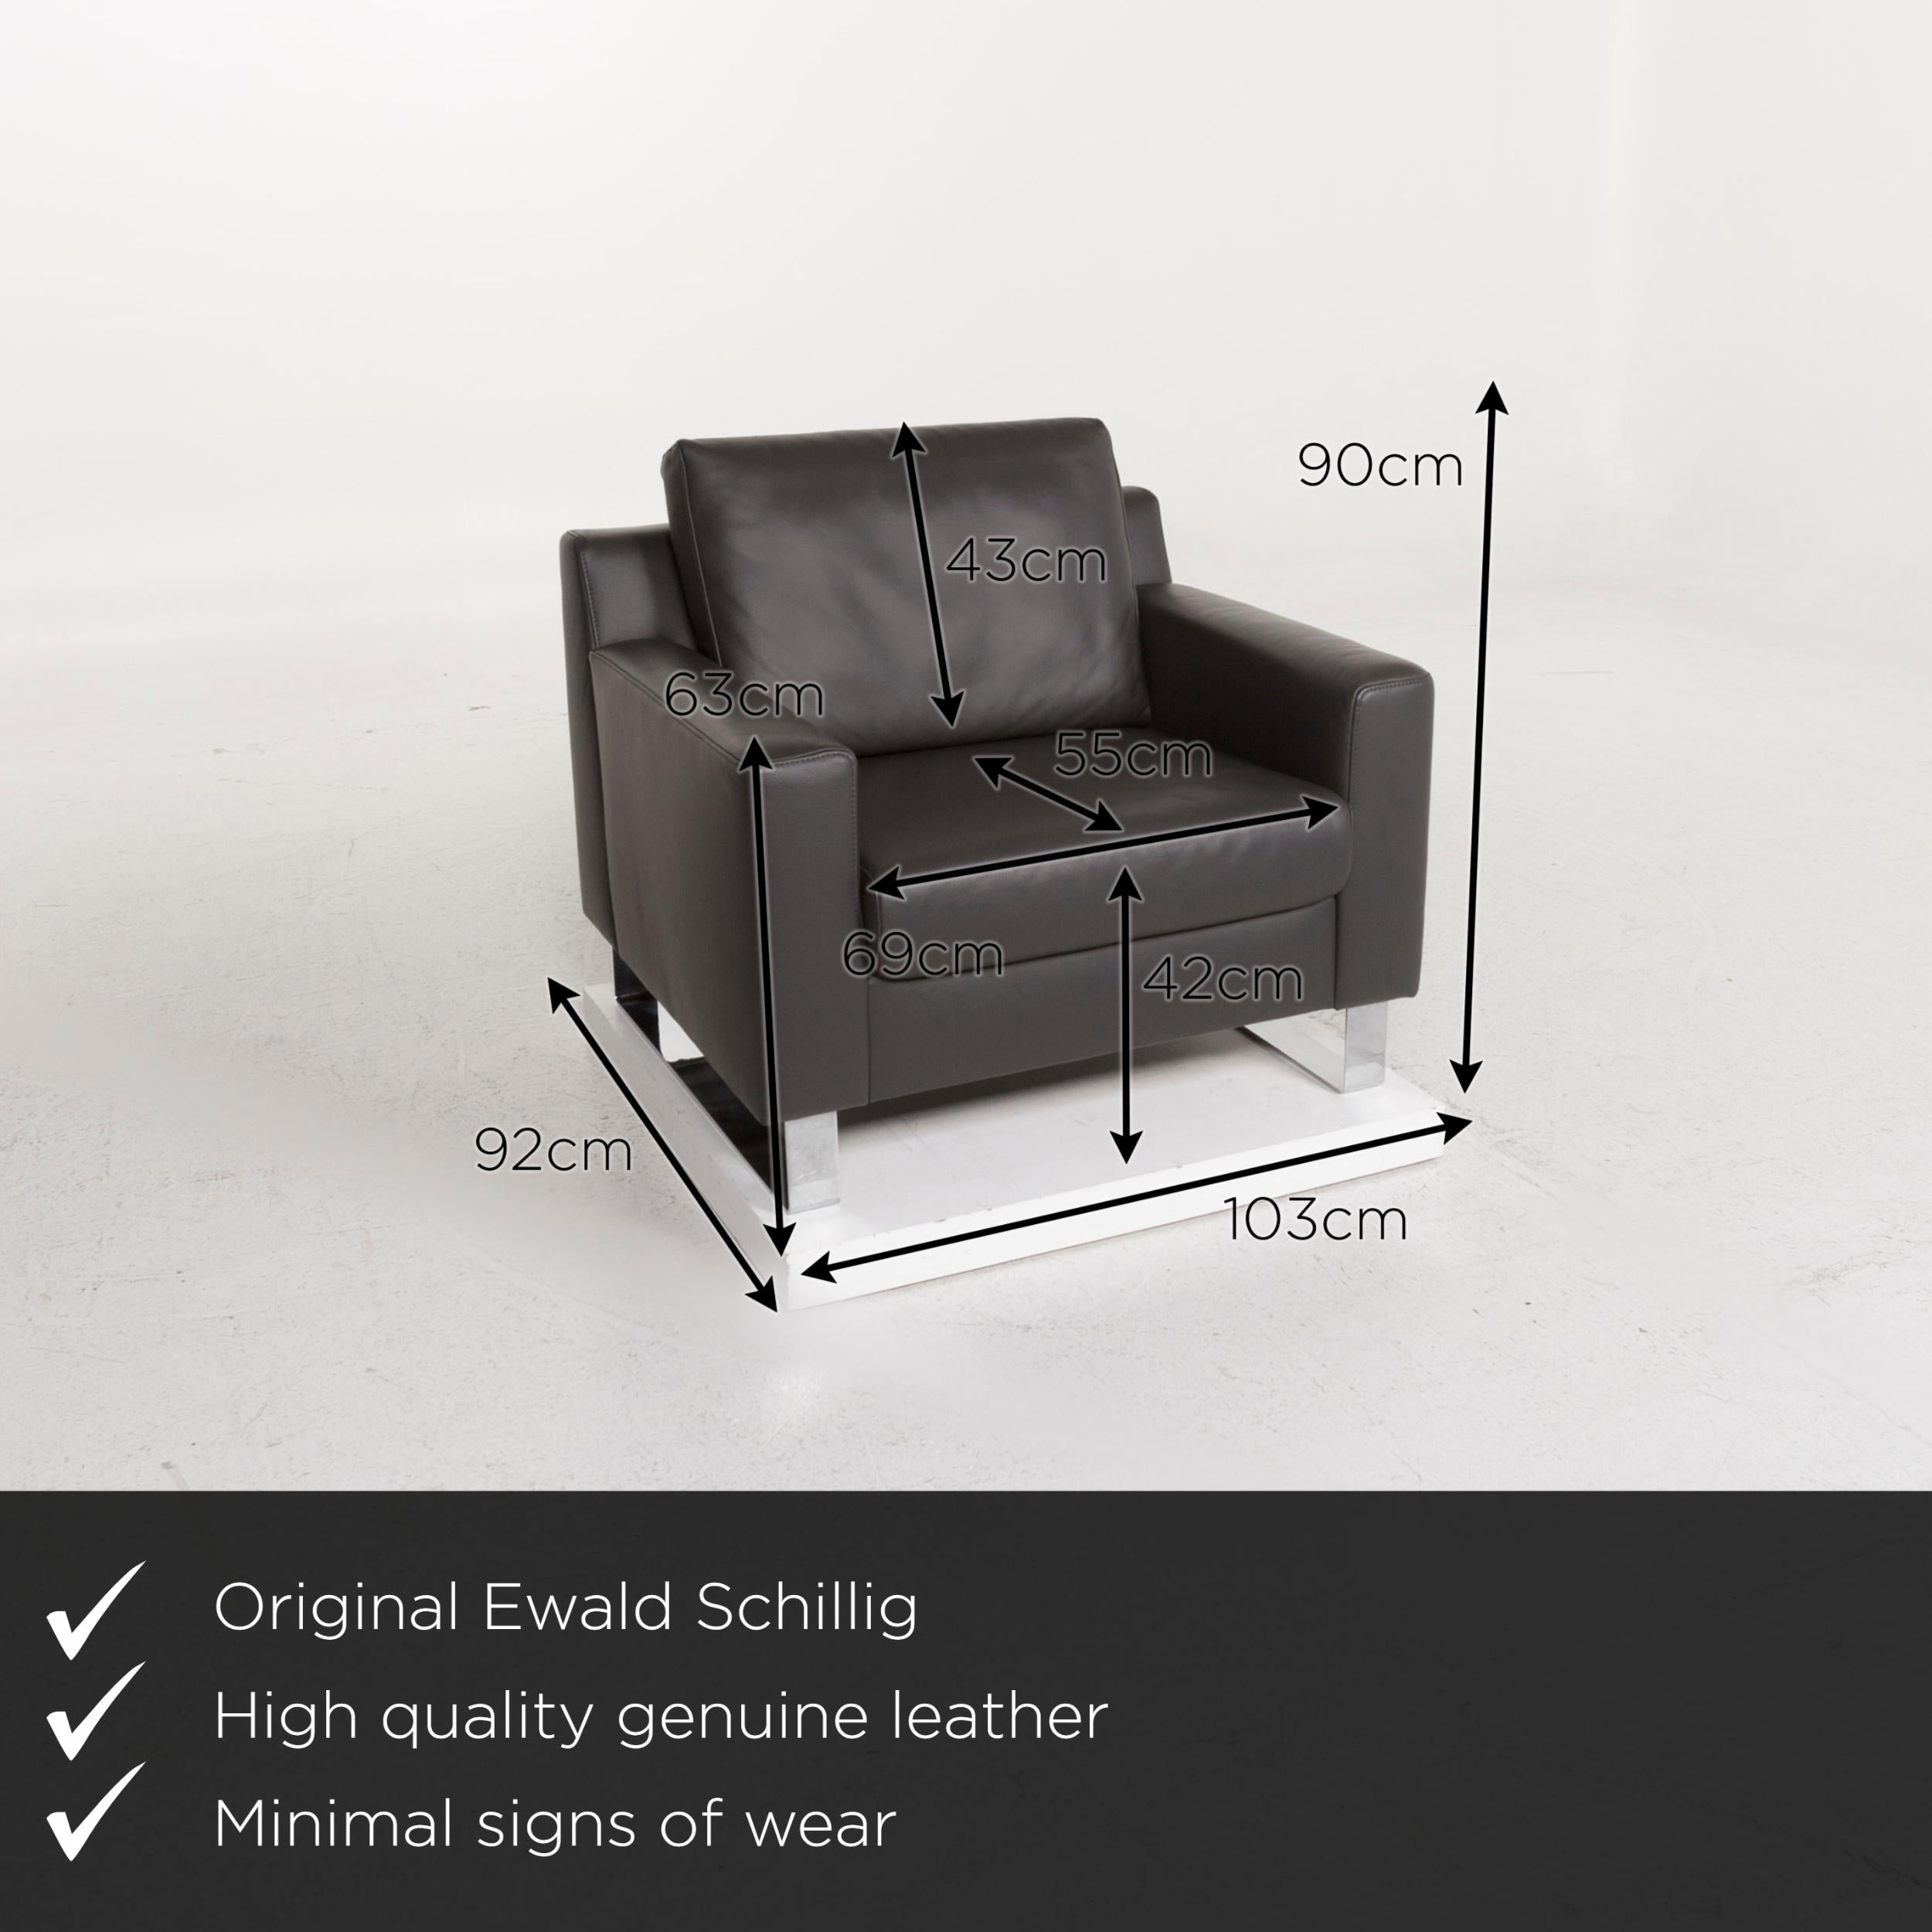 We present to you an Ewald Schillig leather armchair gray.

 

 Product measurements in centimeters:
 

Depth 92
Width 103
Height 90
Seat height 42
Rest height 63
Seat depth 55
Seat width 69
Back height 43.